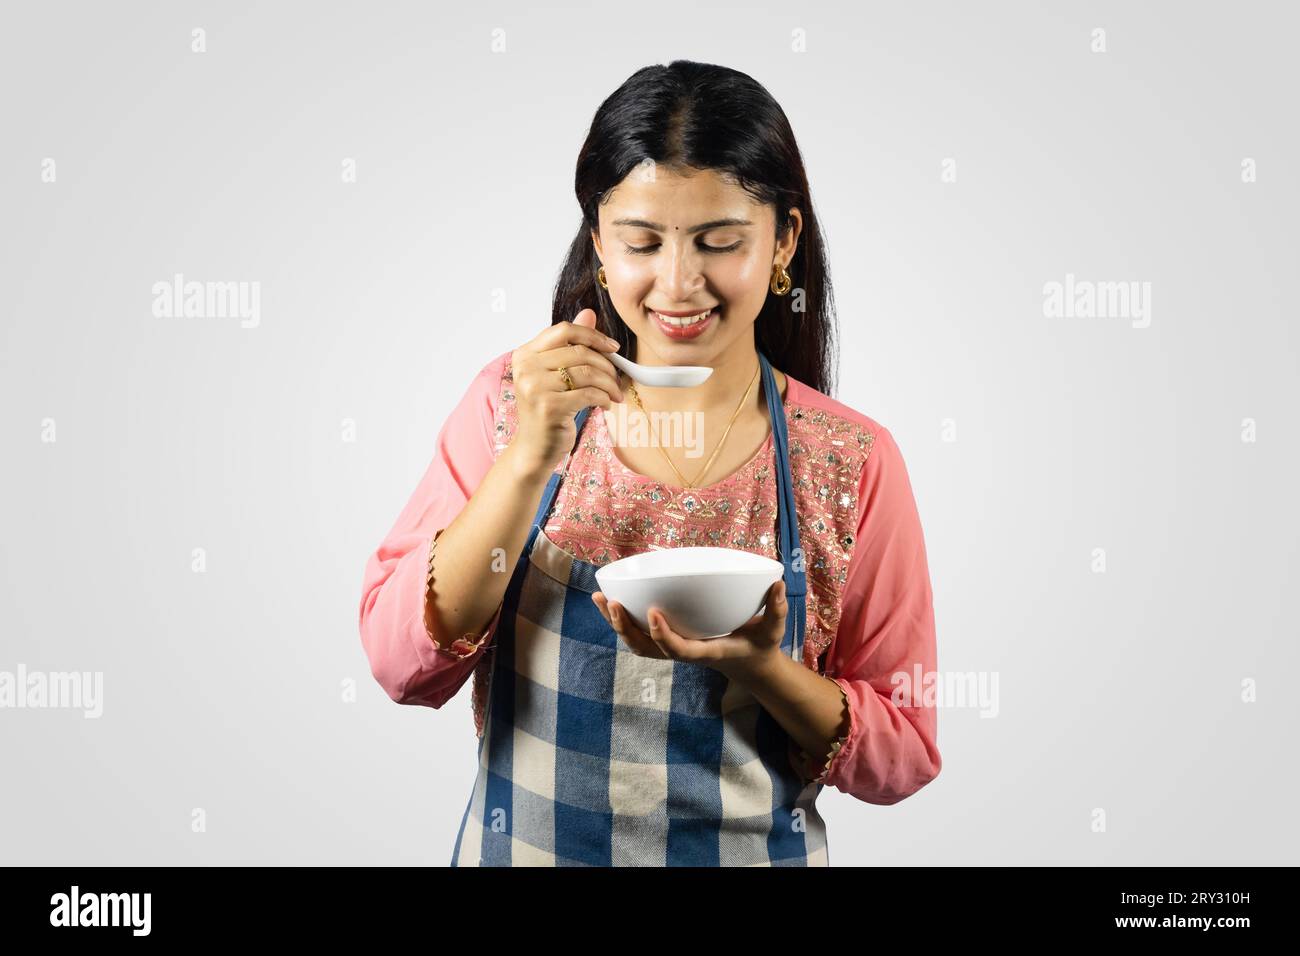 Beautiful Nepalese Indian Housewife in Kurthi, Apron with Kitchen Utensils Smiling, Giving Gestures Stock Photo